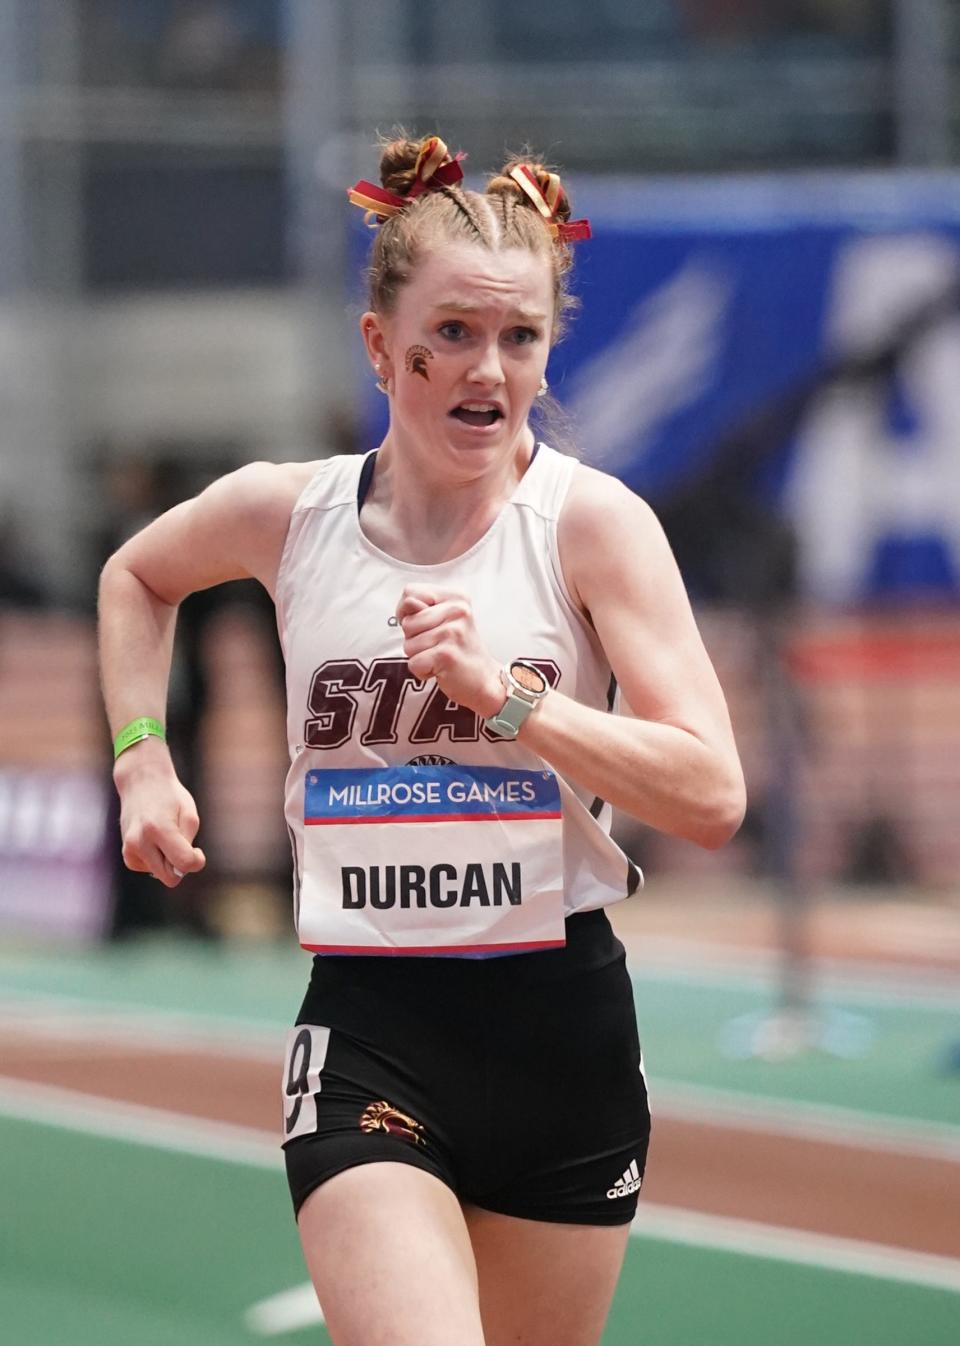 Ciara Durcan competes in the Women's Mile Racewalk at the 115th Millrose Games at The Armory in New York on Saturday, February 11, 2023. Durkin ran a 7:12.81 time.